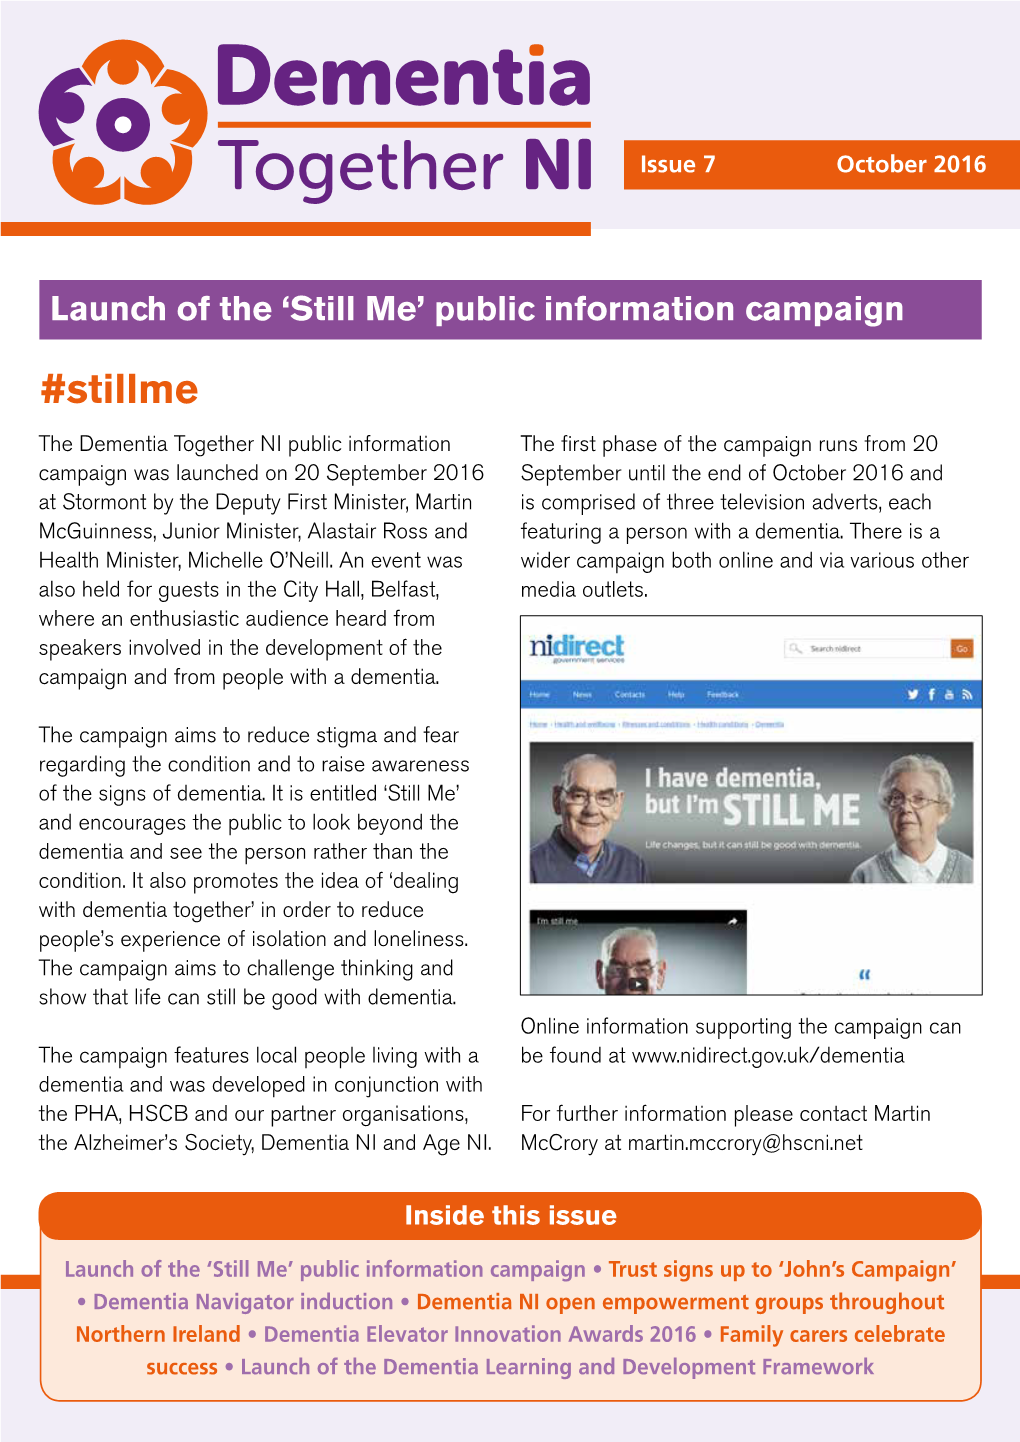 Launch of the 'Still Me' Public Information Campaign